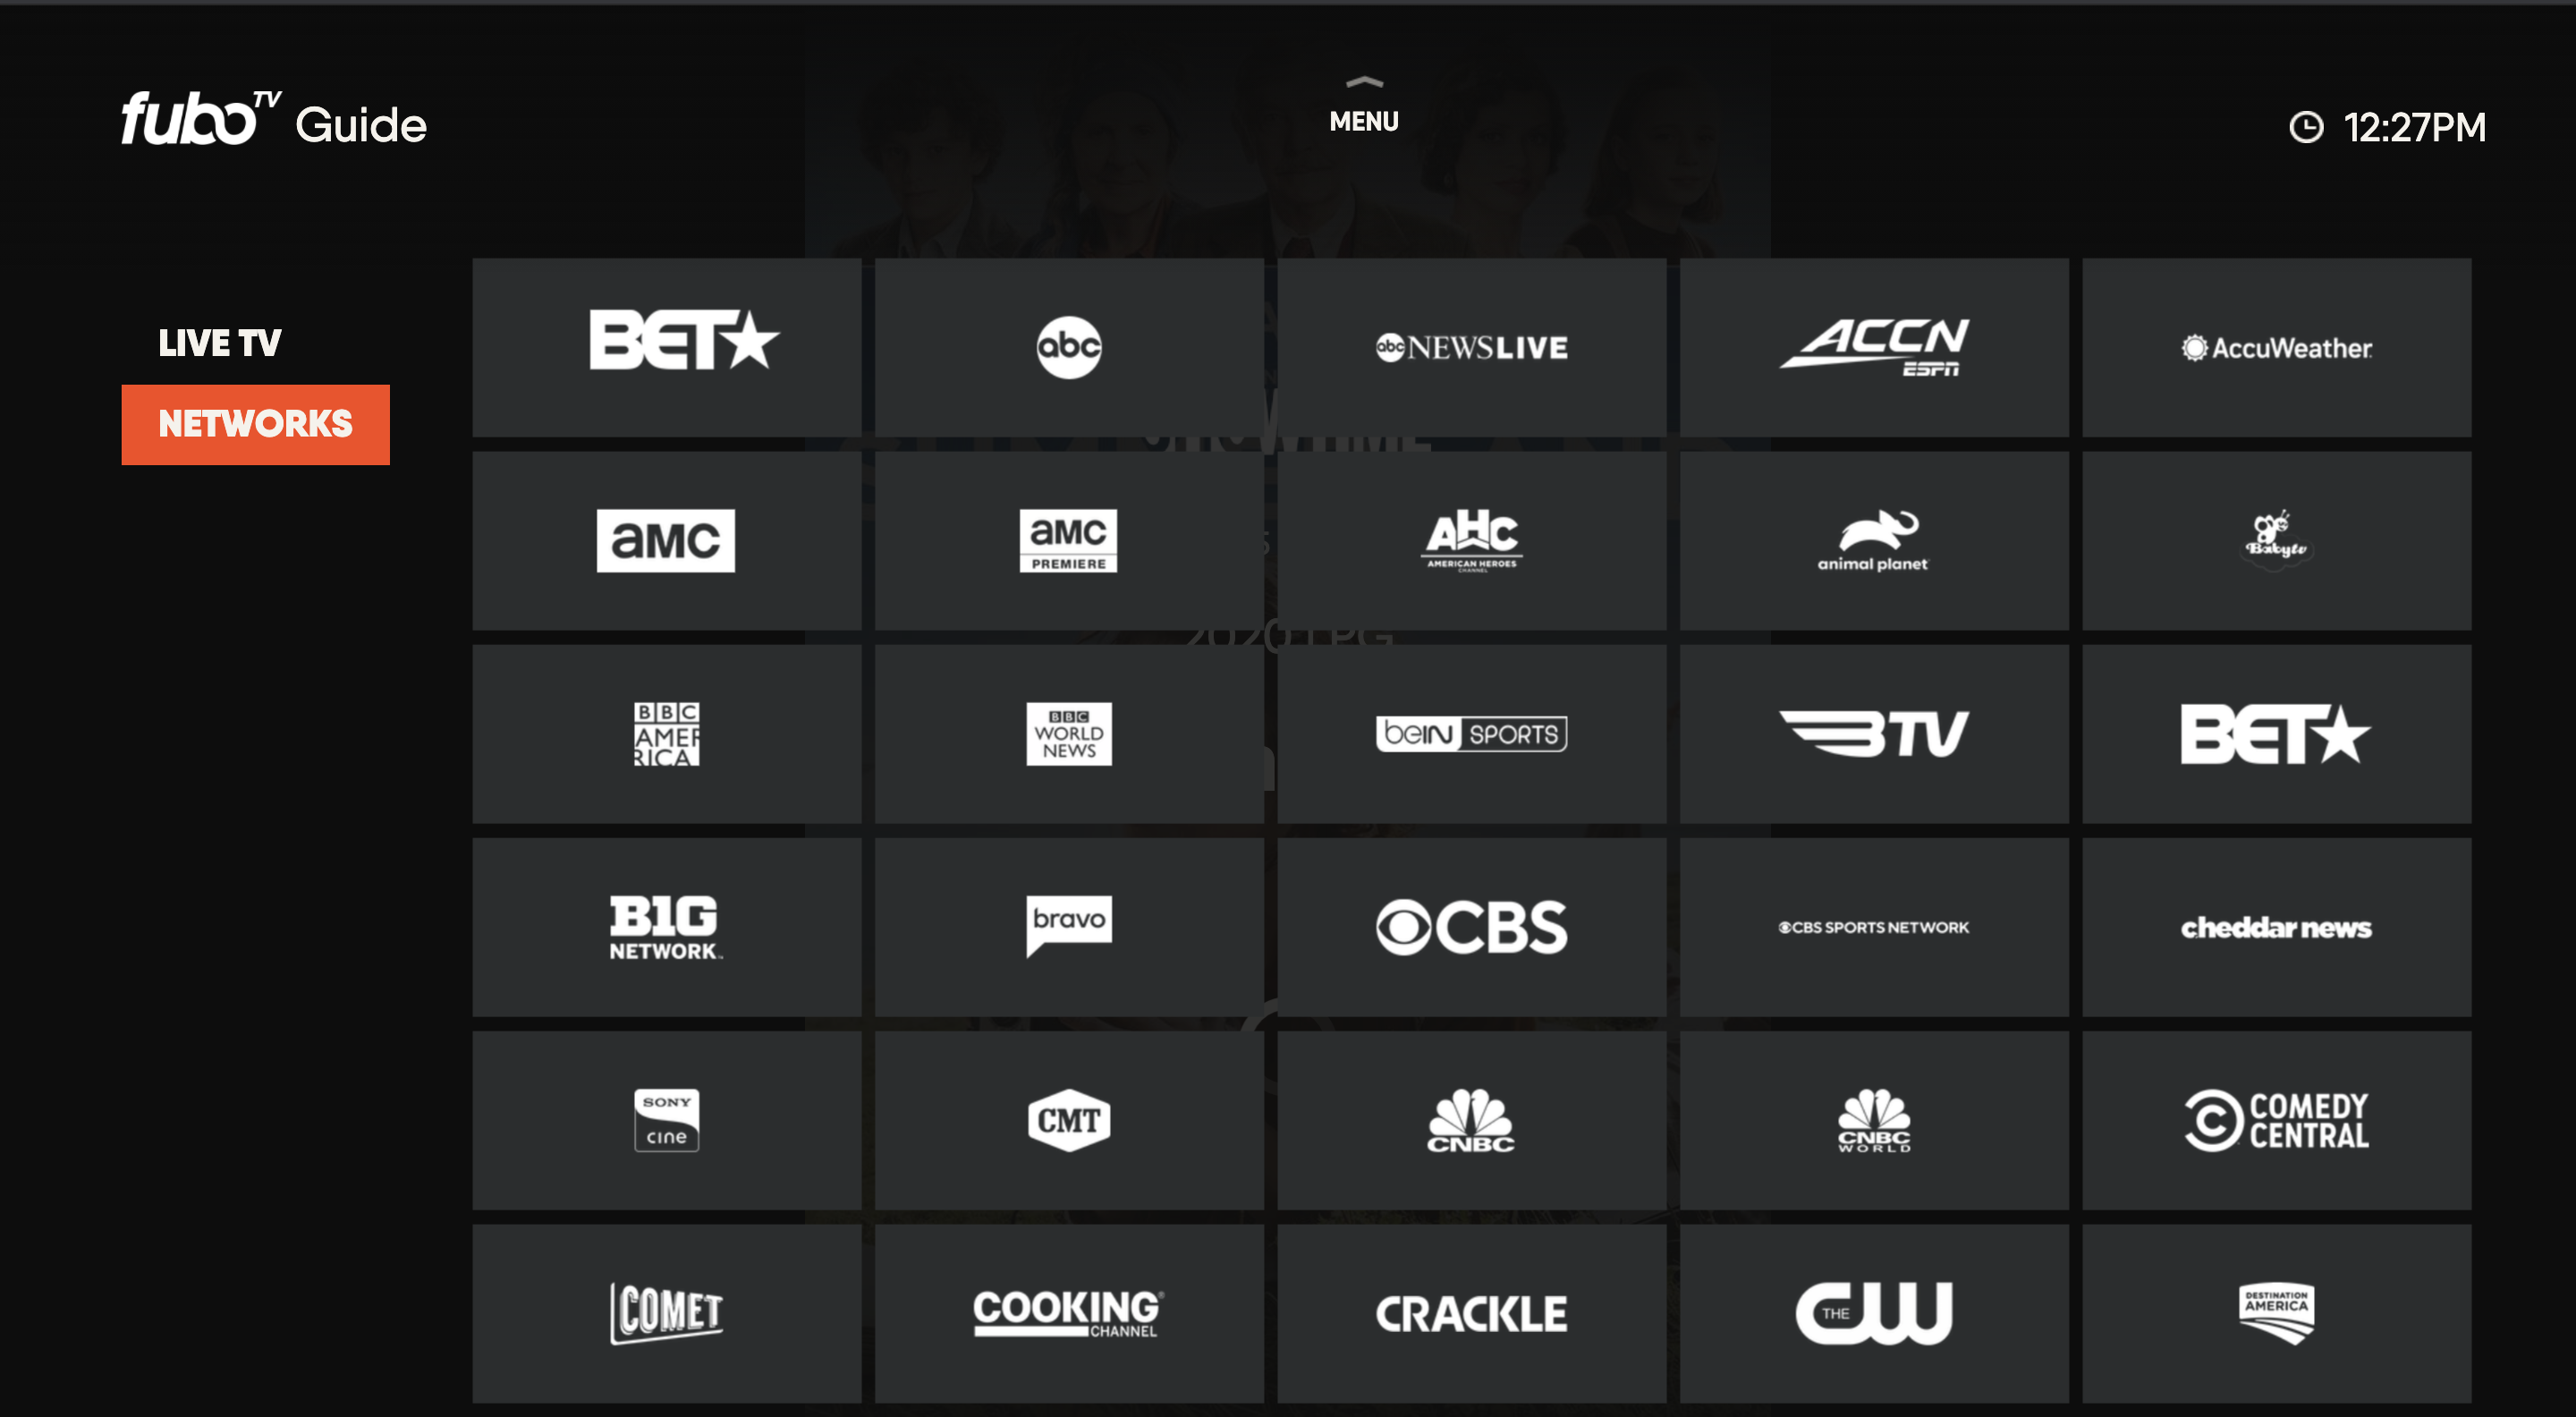 The NETWORKS screen of the FuboTV app on Samsung TV; accessible from the GUIDE screen, it shows available channels